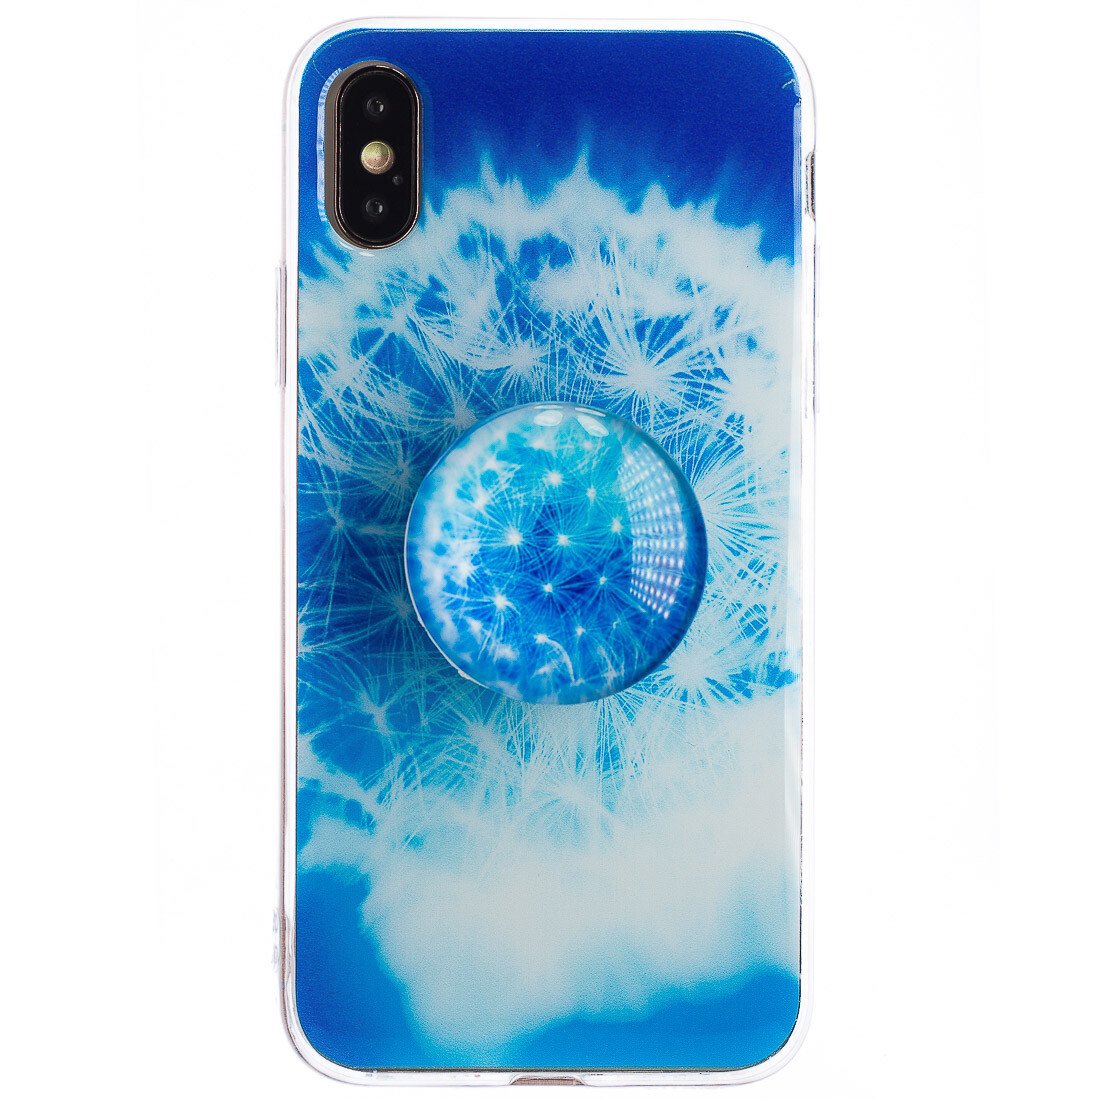 Husa Silicon cu suport iPhone X/XS, Floral thumb